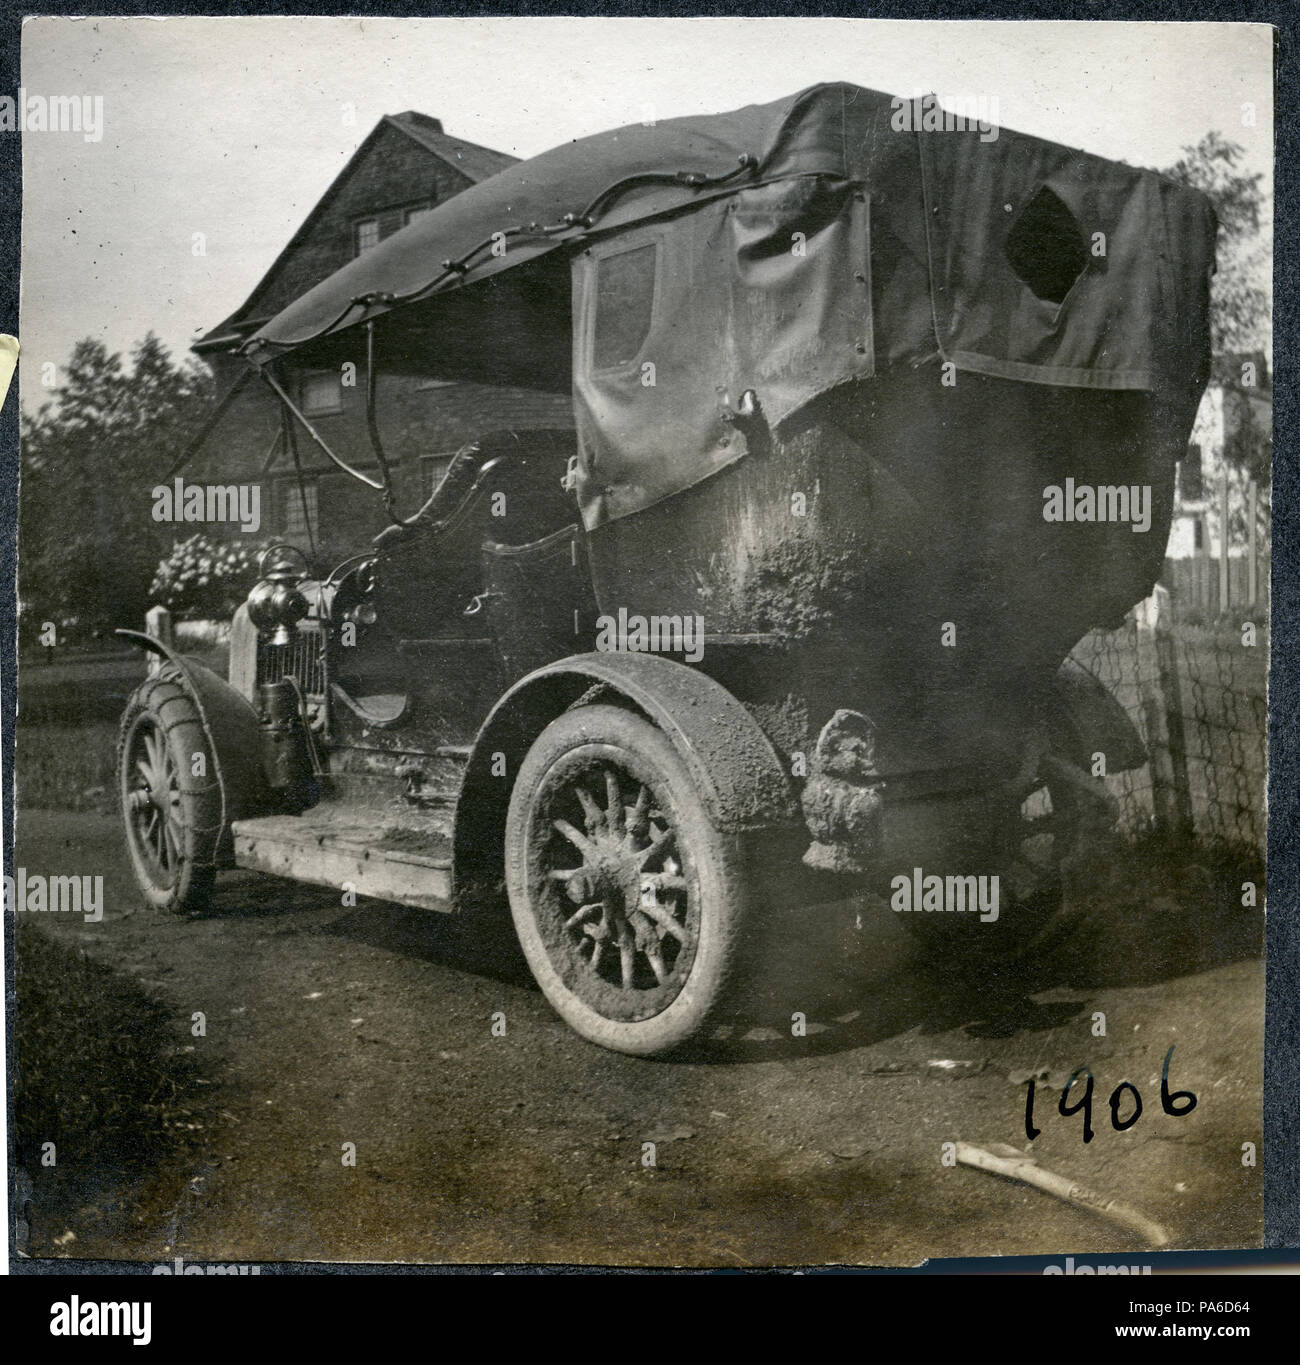 27 1906 Pope Toledo automobile seen from the back, coated in mud Stock Photo